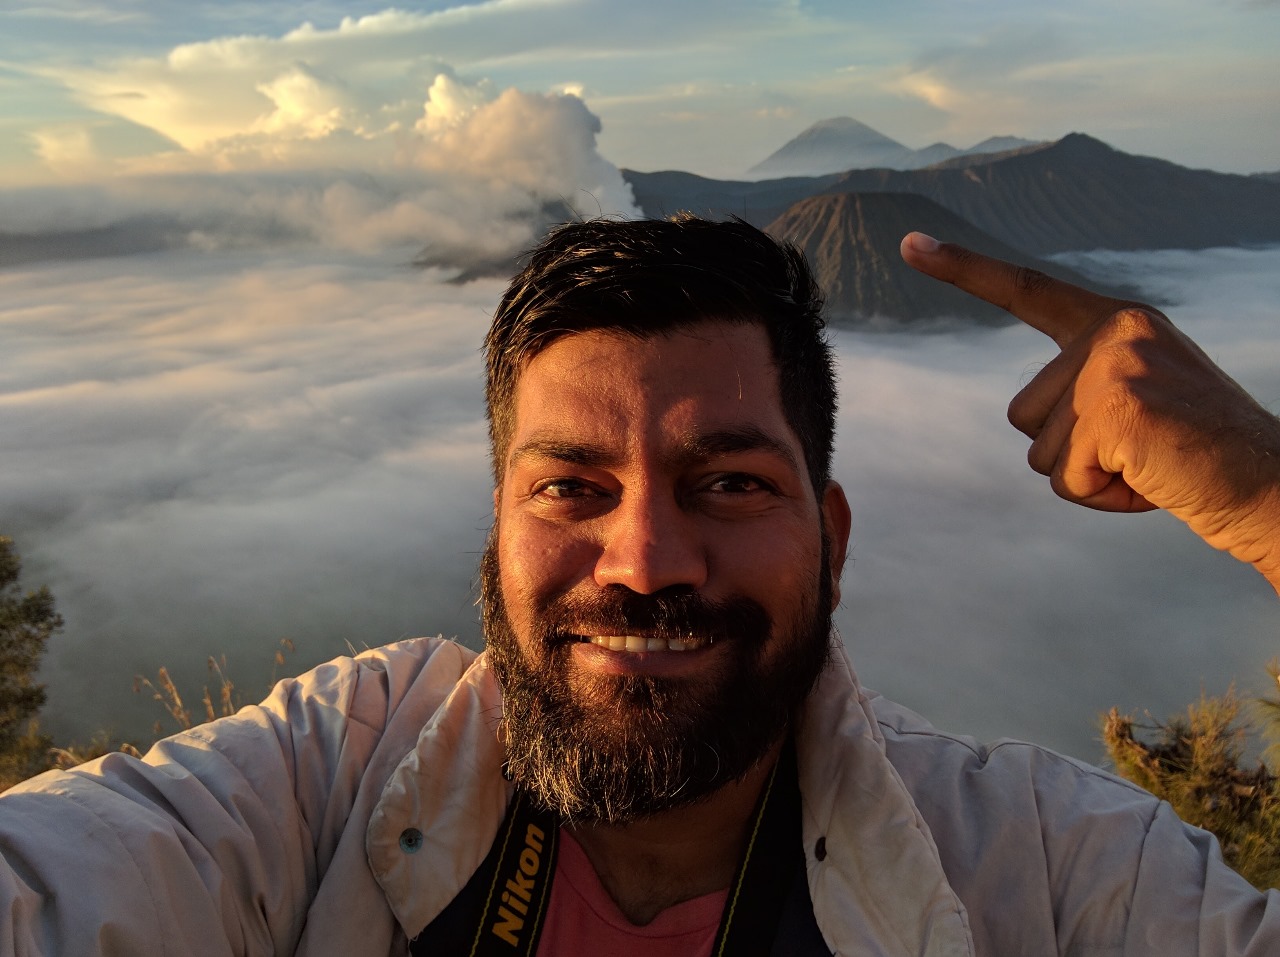 The image shows nomadgao founder Mayur Sontakke in Indonesia